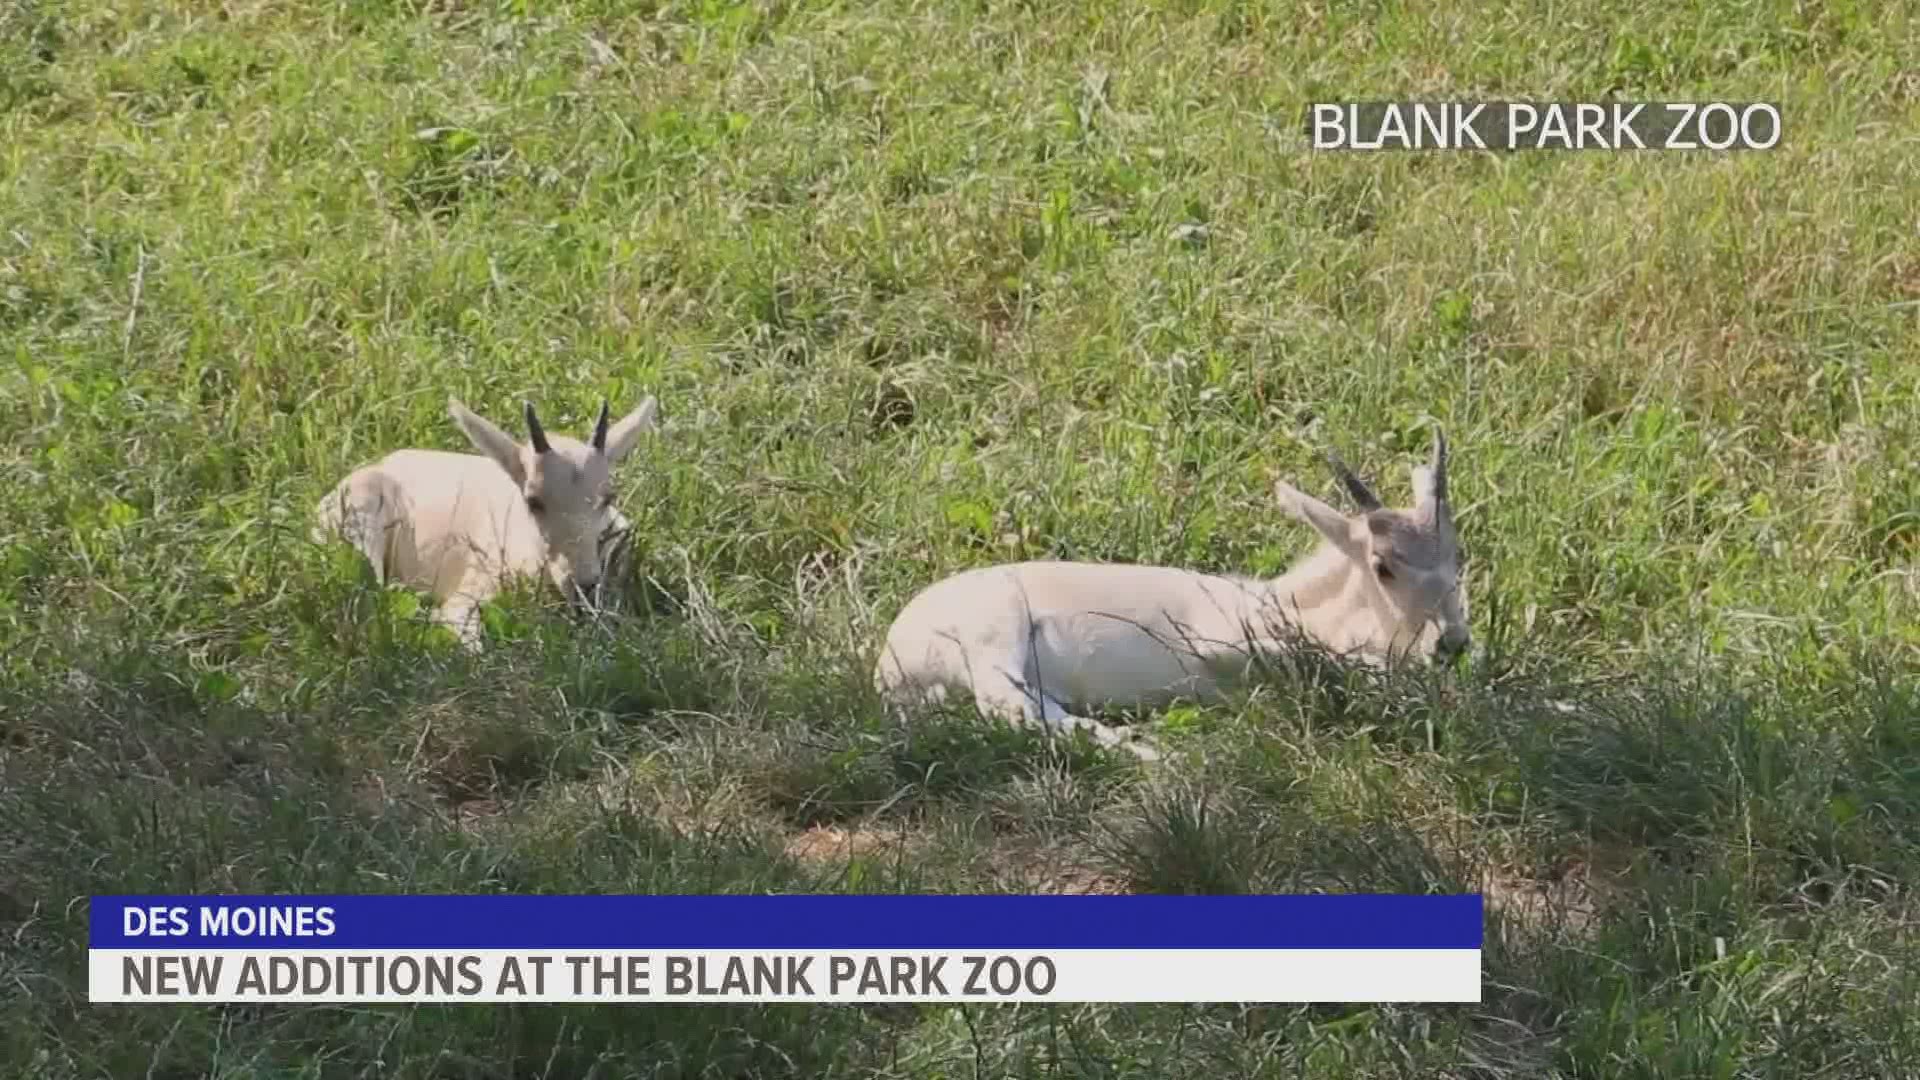 The Blank Park Zoo in Des Moines is sharing some of its new additions!